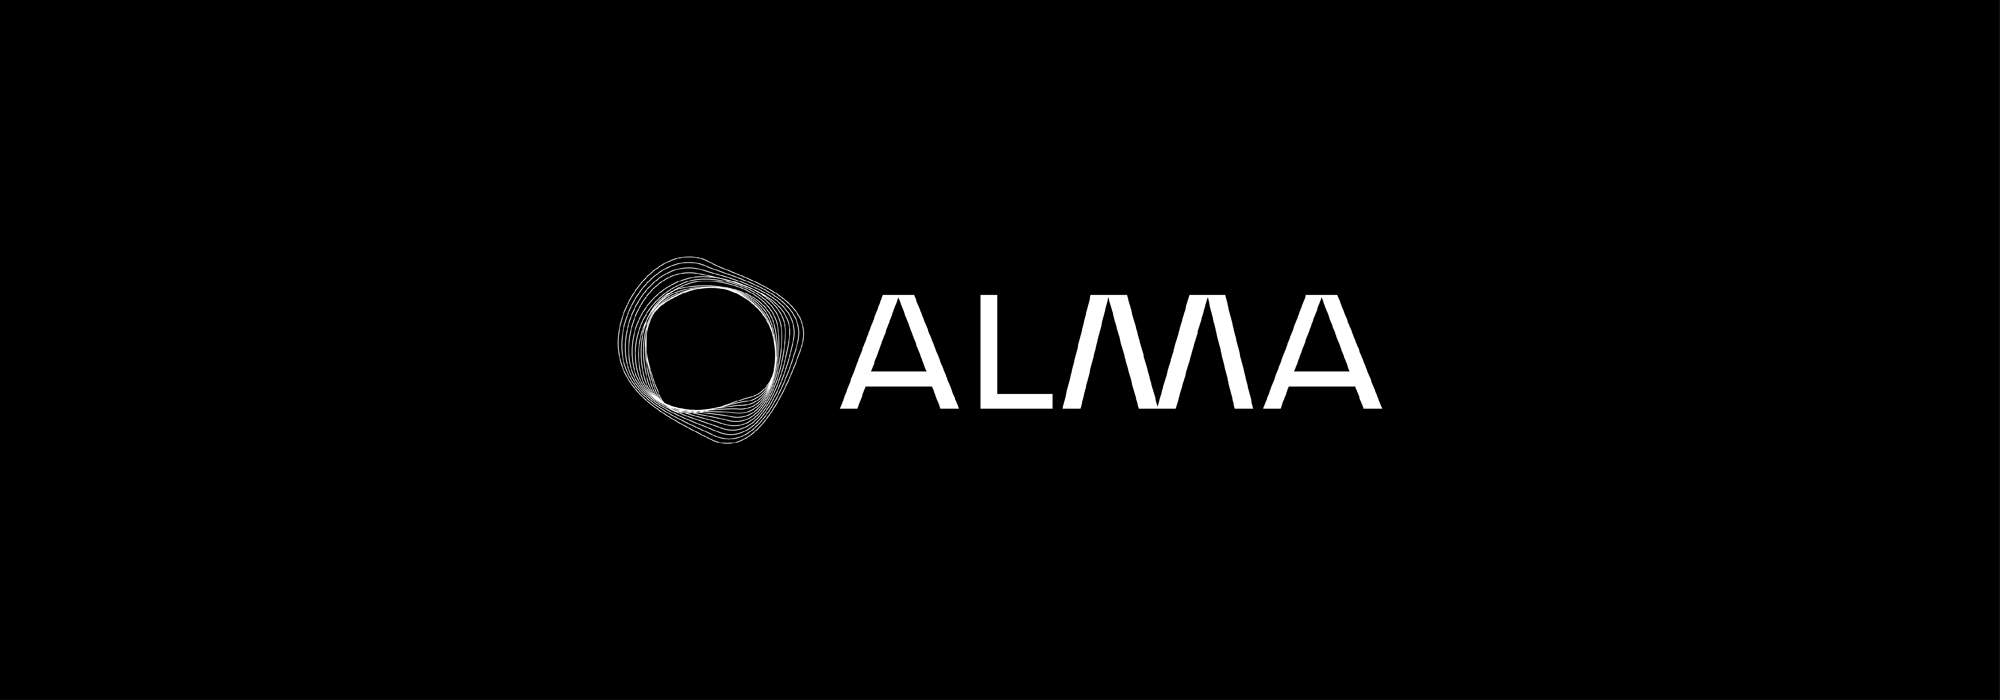 ALMA - Networked management and control of systems and processors